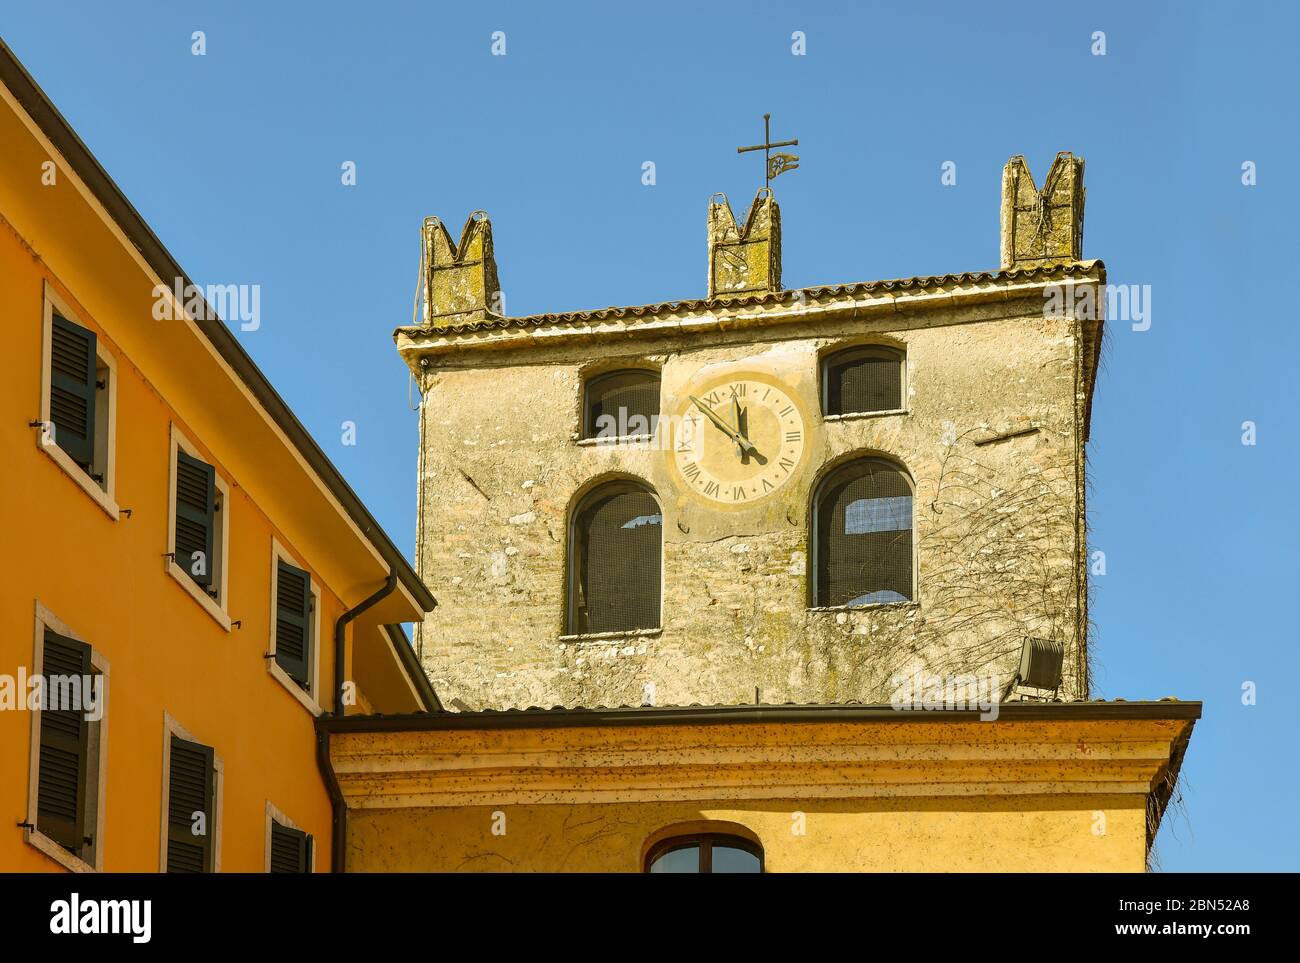 Top of the medieval clock tower of the old town of Garda, Verona province, Veneto, Italy Stock Photo